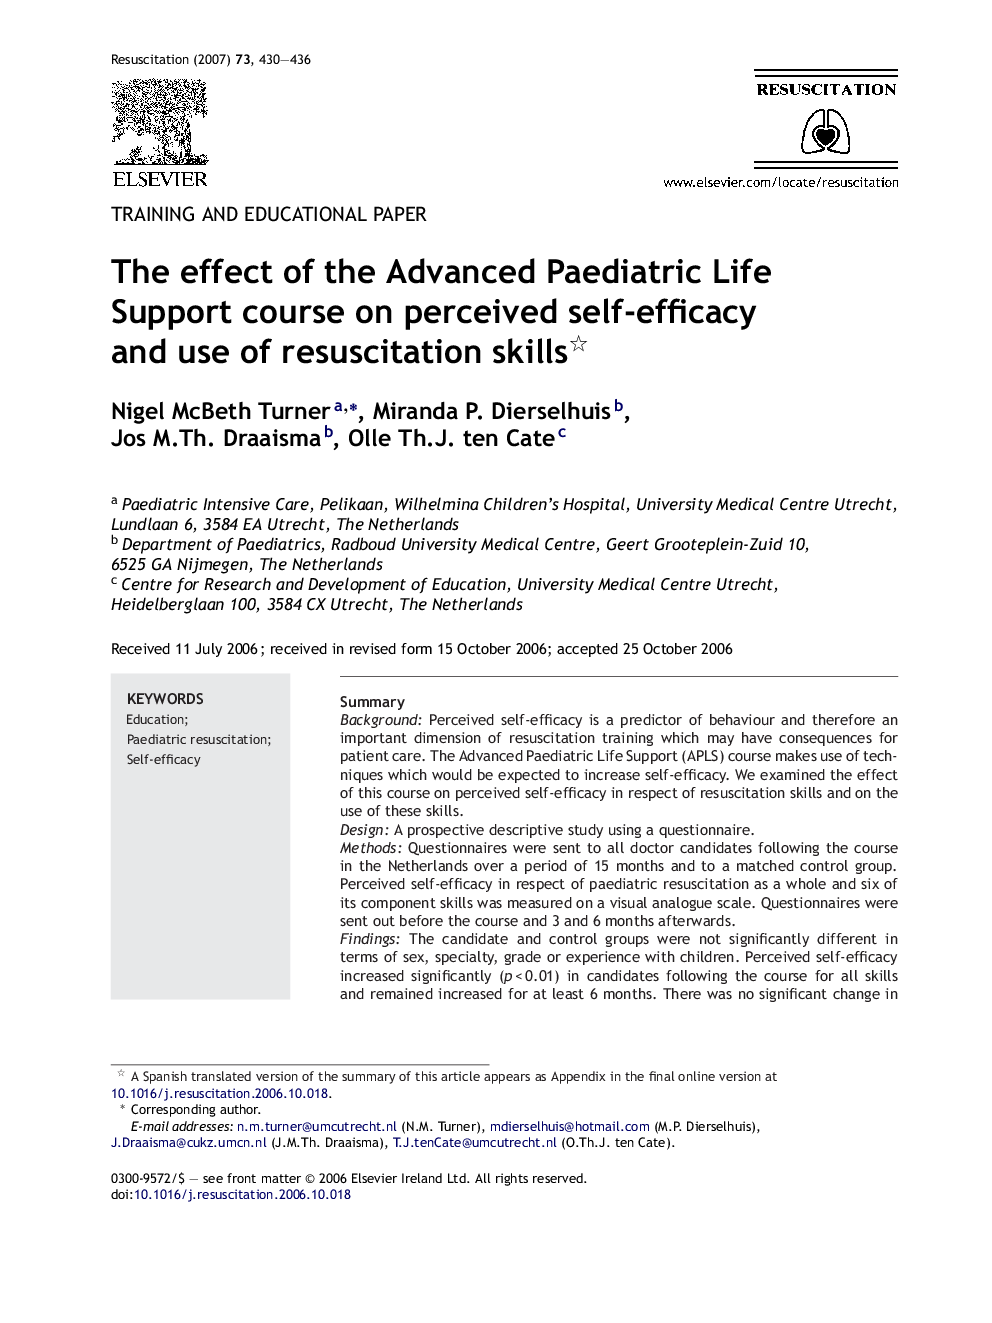 The effect of the Advanced Paediatric Life Support course on perceived self-efficacy and use of resuscitation skills 